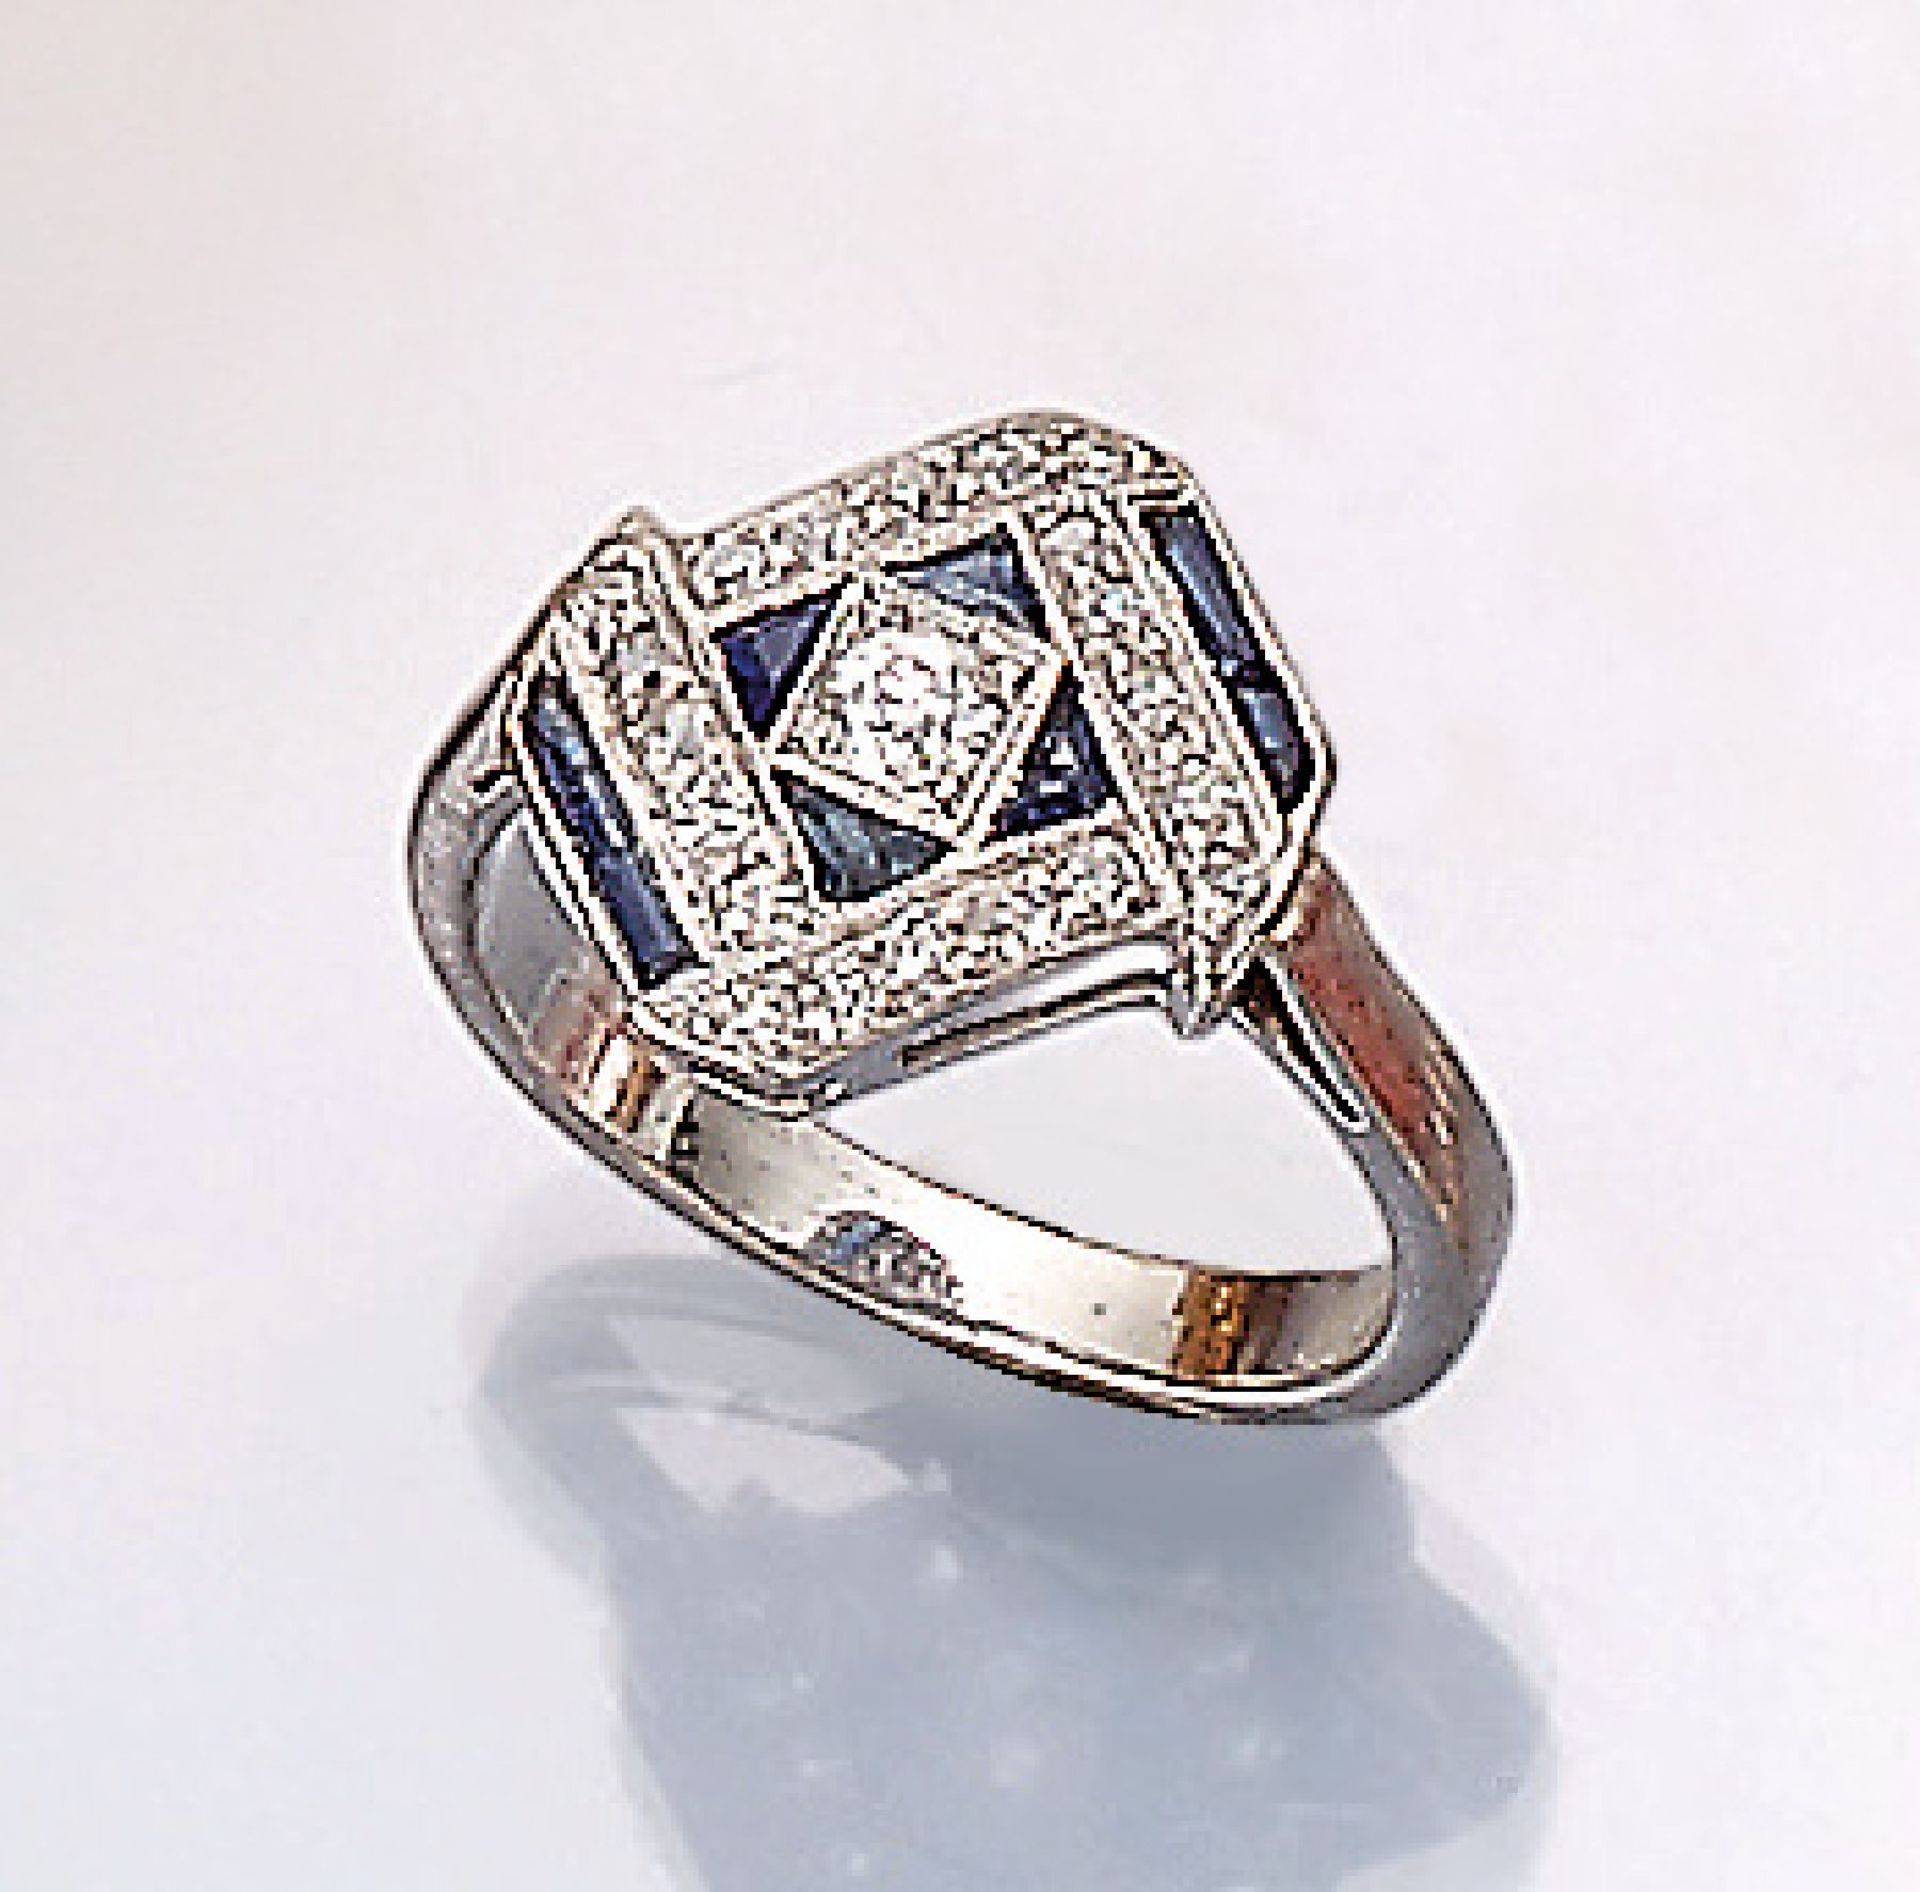 Platinum ring with diamonds and sapphires , approx. 1920, 21 old cut diamond total approx. 0.25 ct